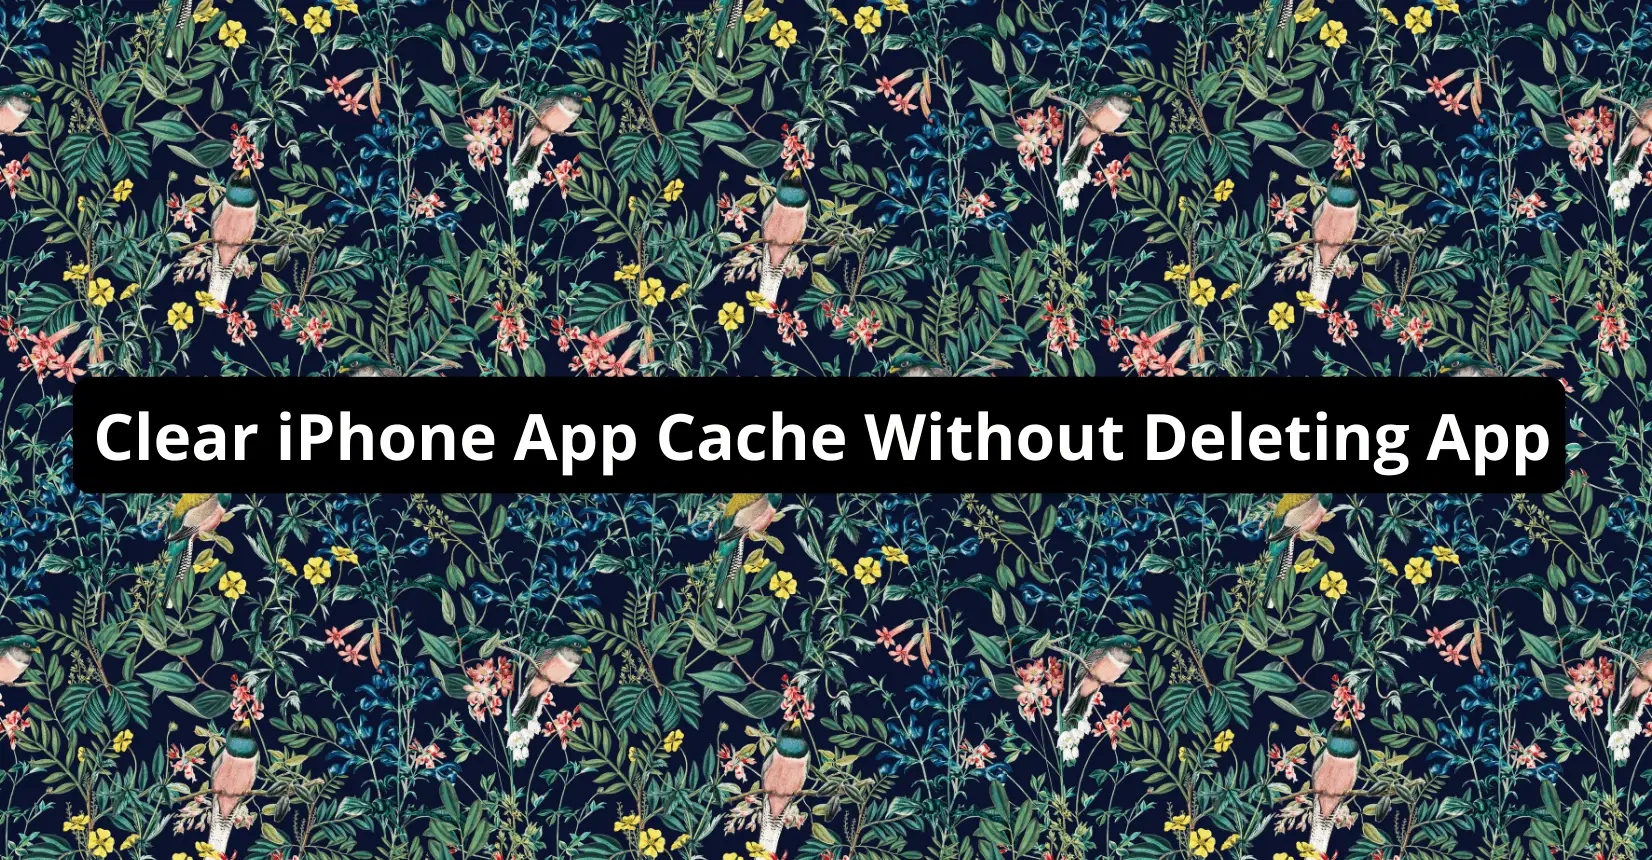 Clear iPhone App Cache Without Deleting App